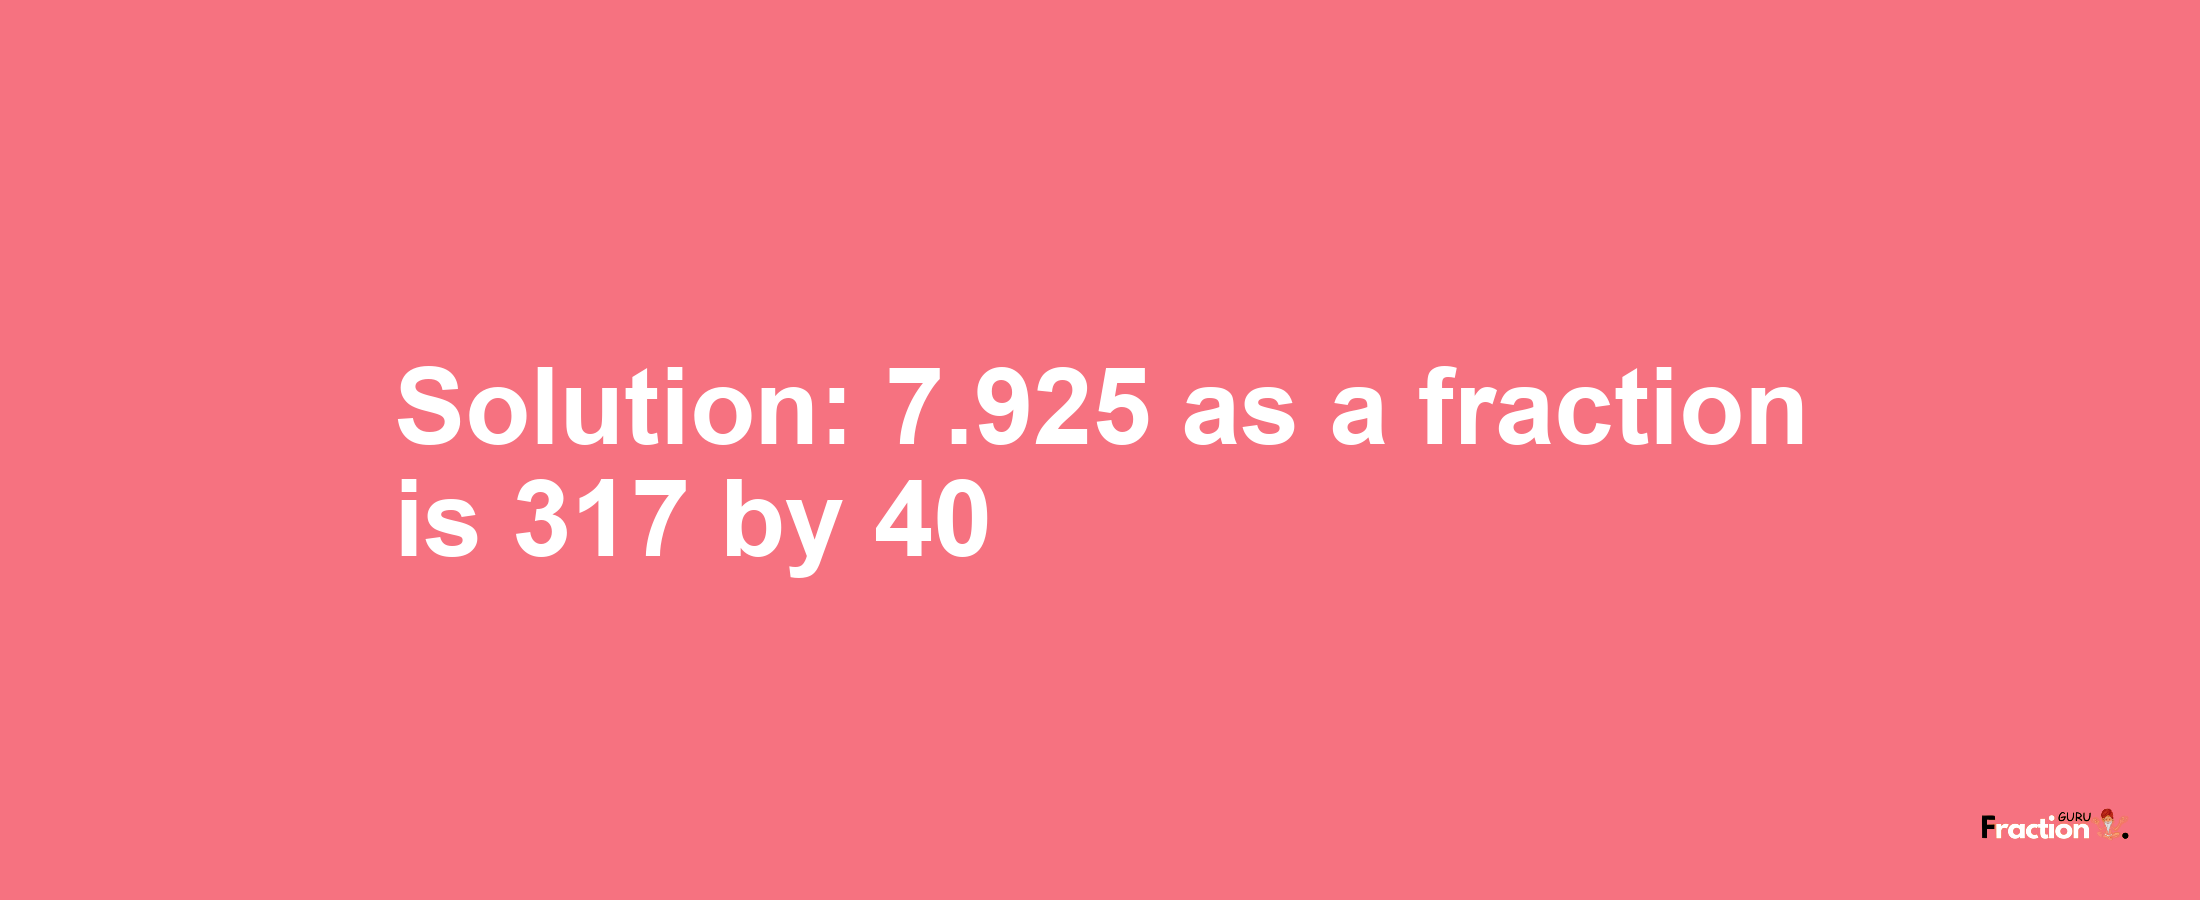 Solution:7.925 as a fraction is 317/40